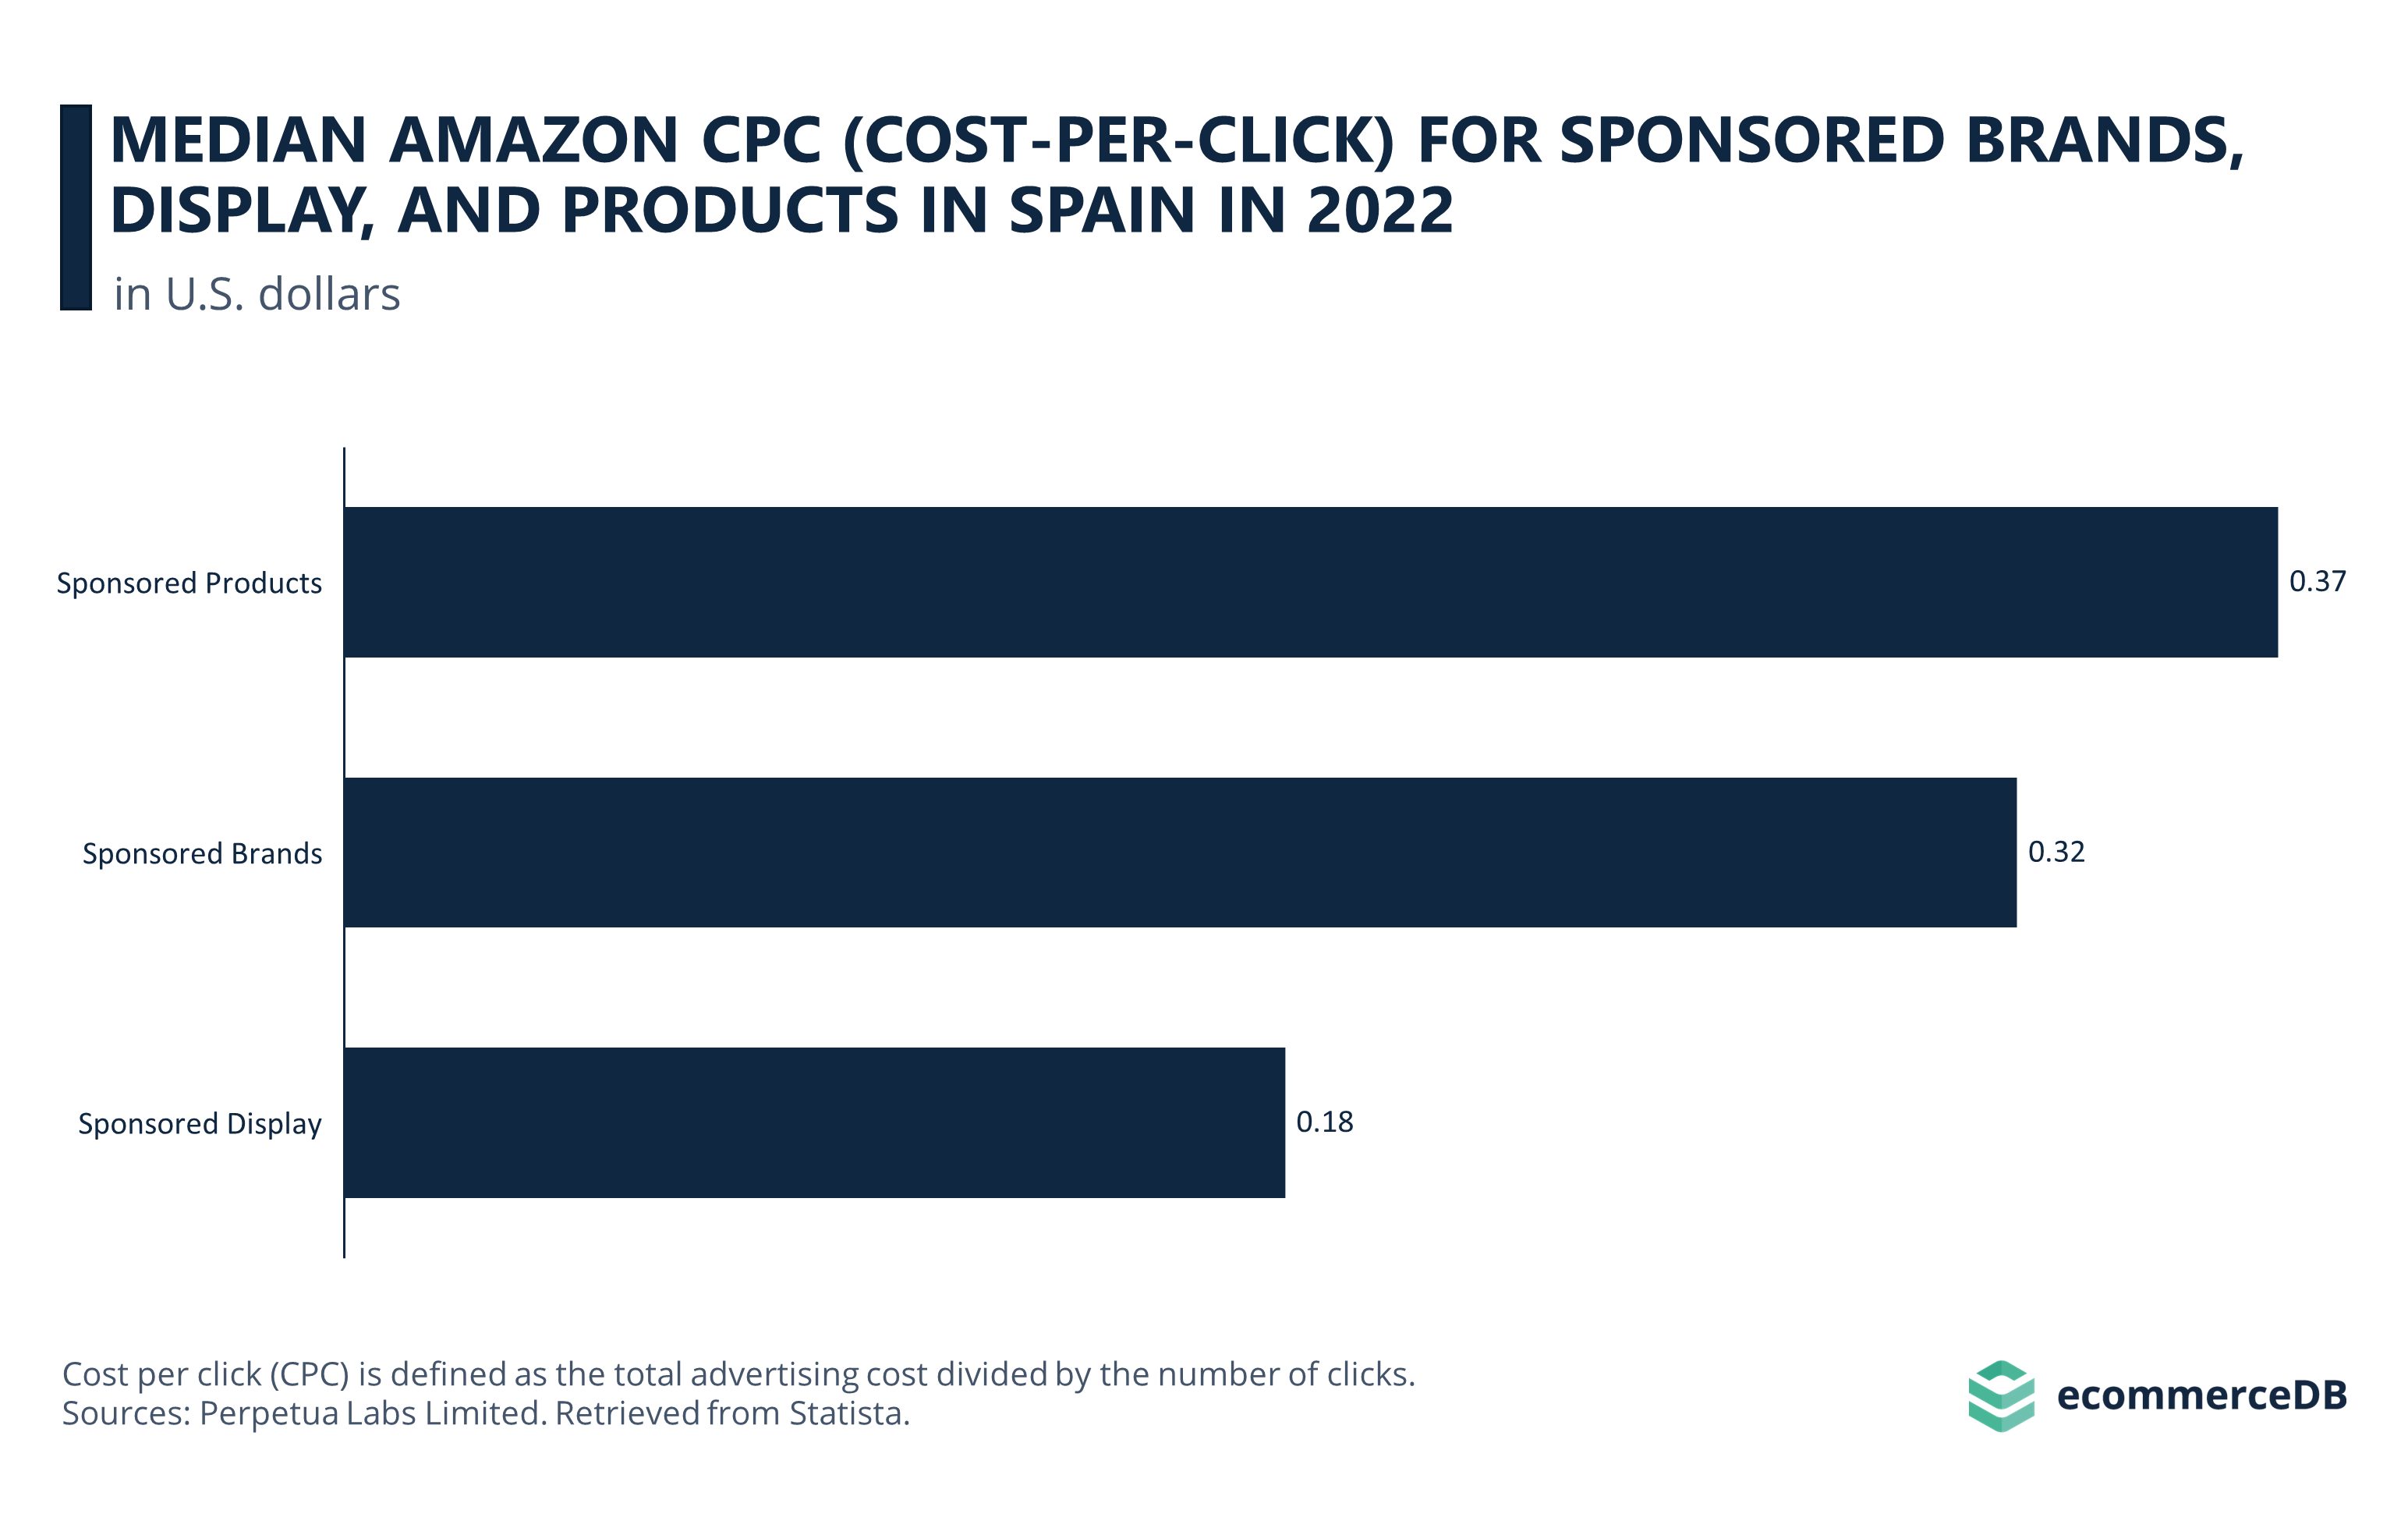 Median Amazon CPC for 3 Ad Types in Spain